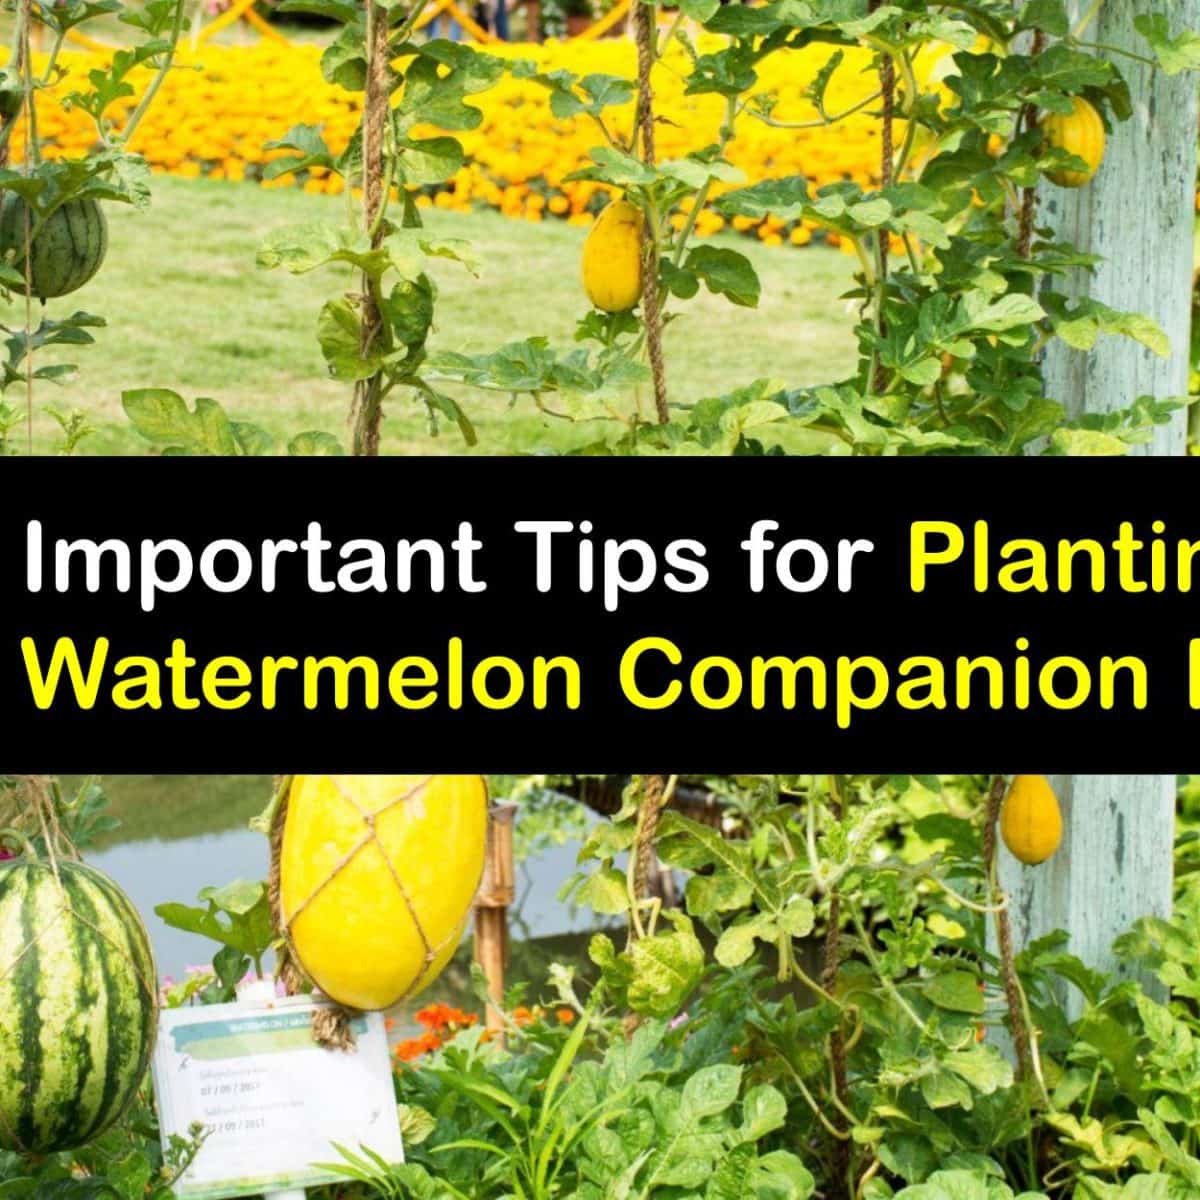 Image of Marigolds companion plant for watermelon and cantaloupe